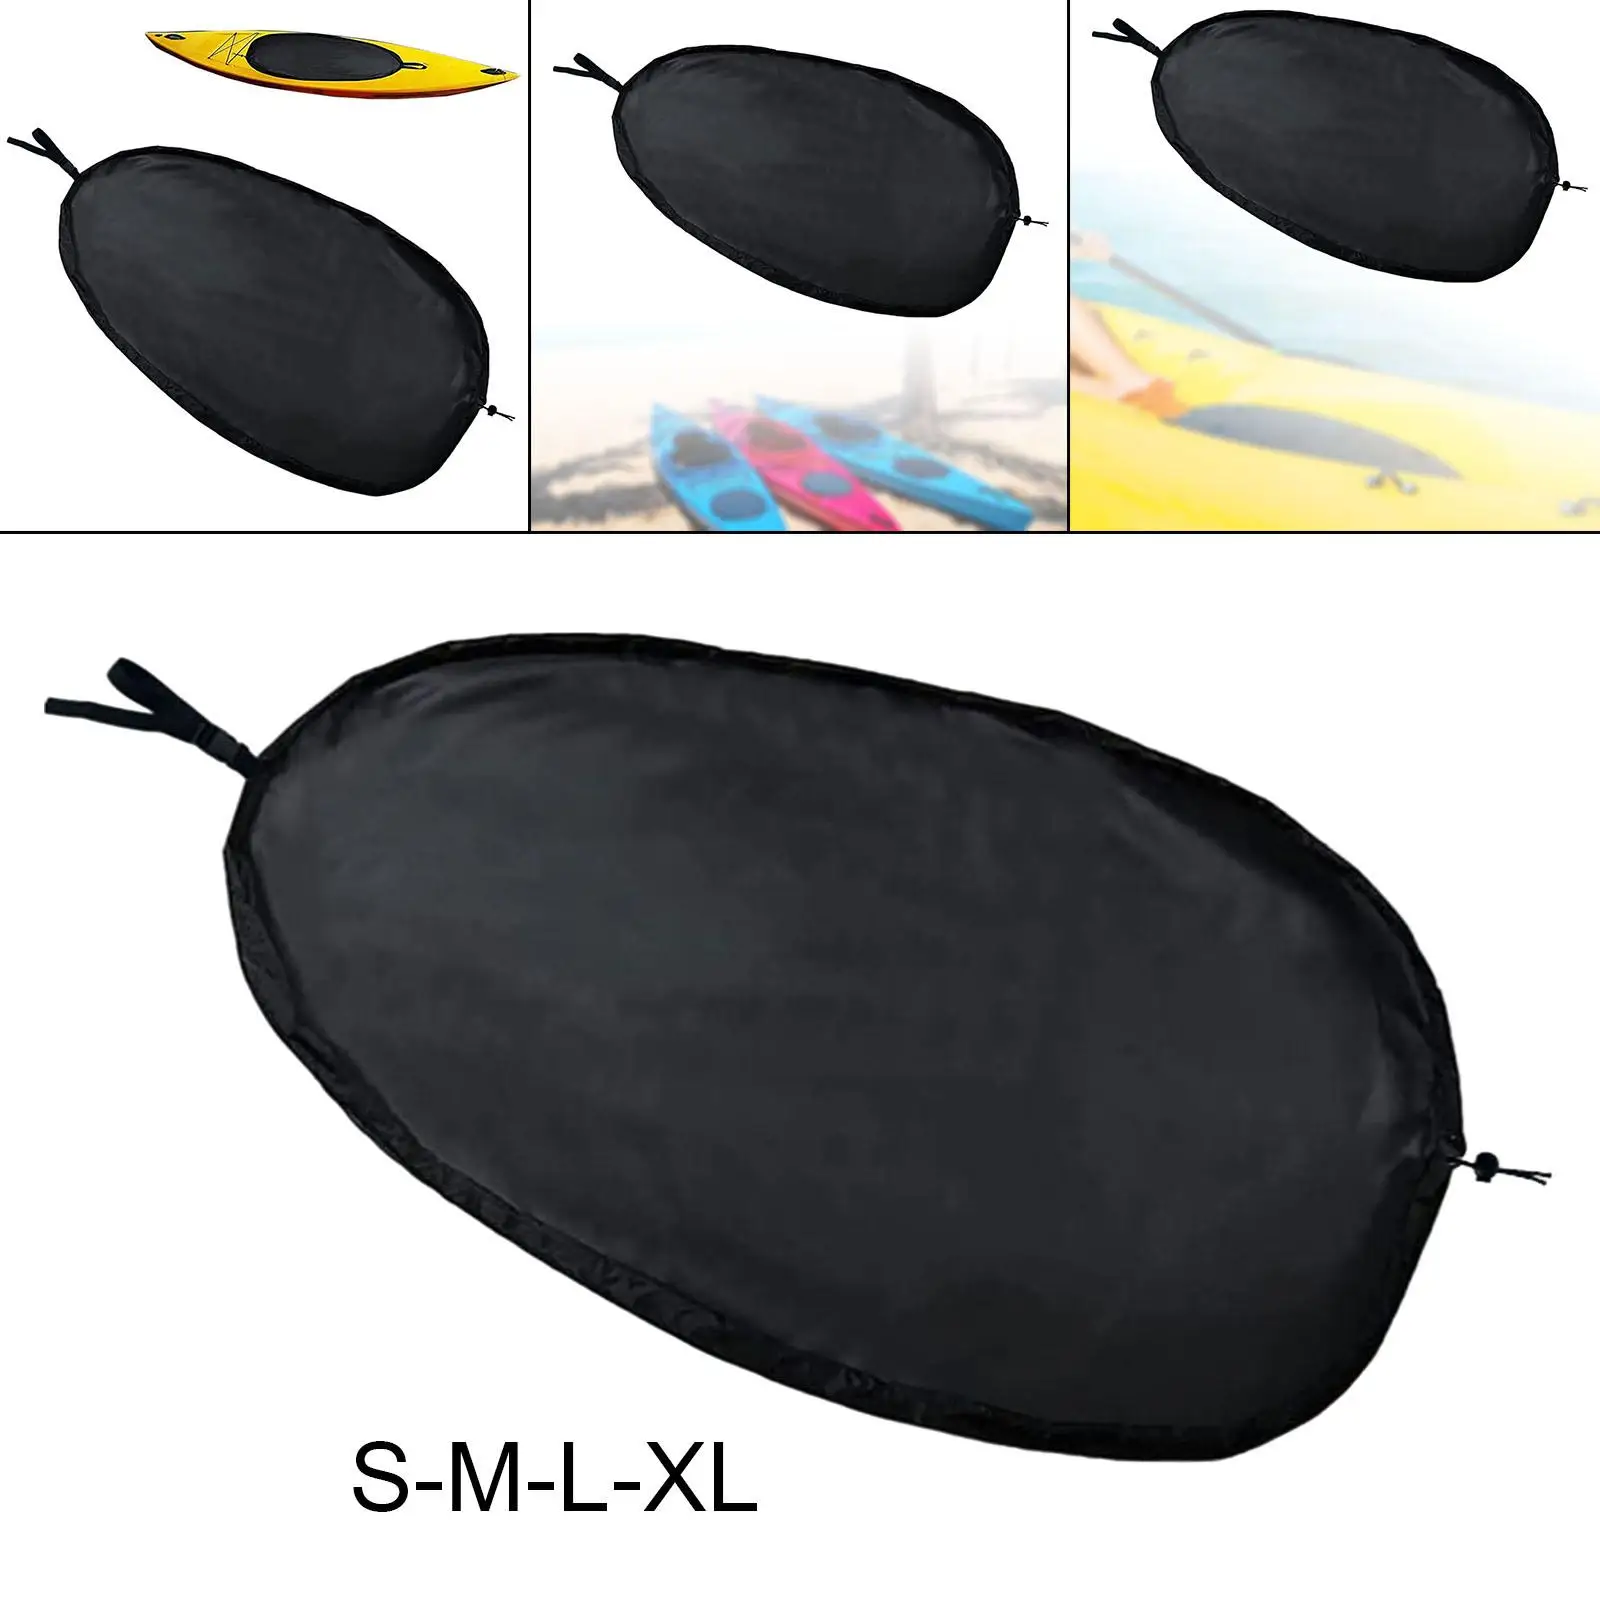 Universal Kayak Cockpit Cover Oxford Cloth Durable Sun Protection Cover for Fishing Canoe